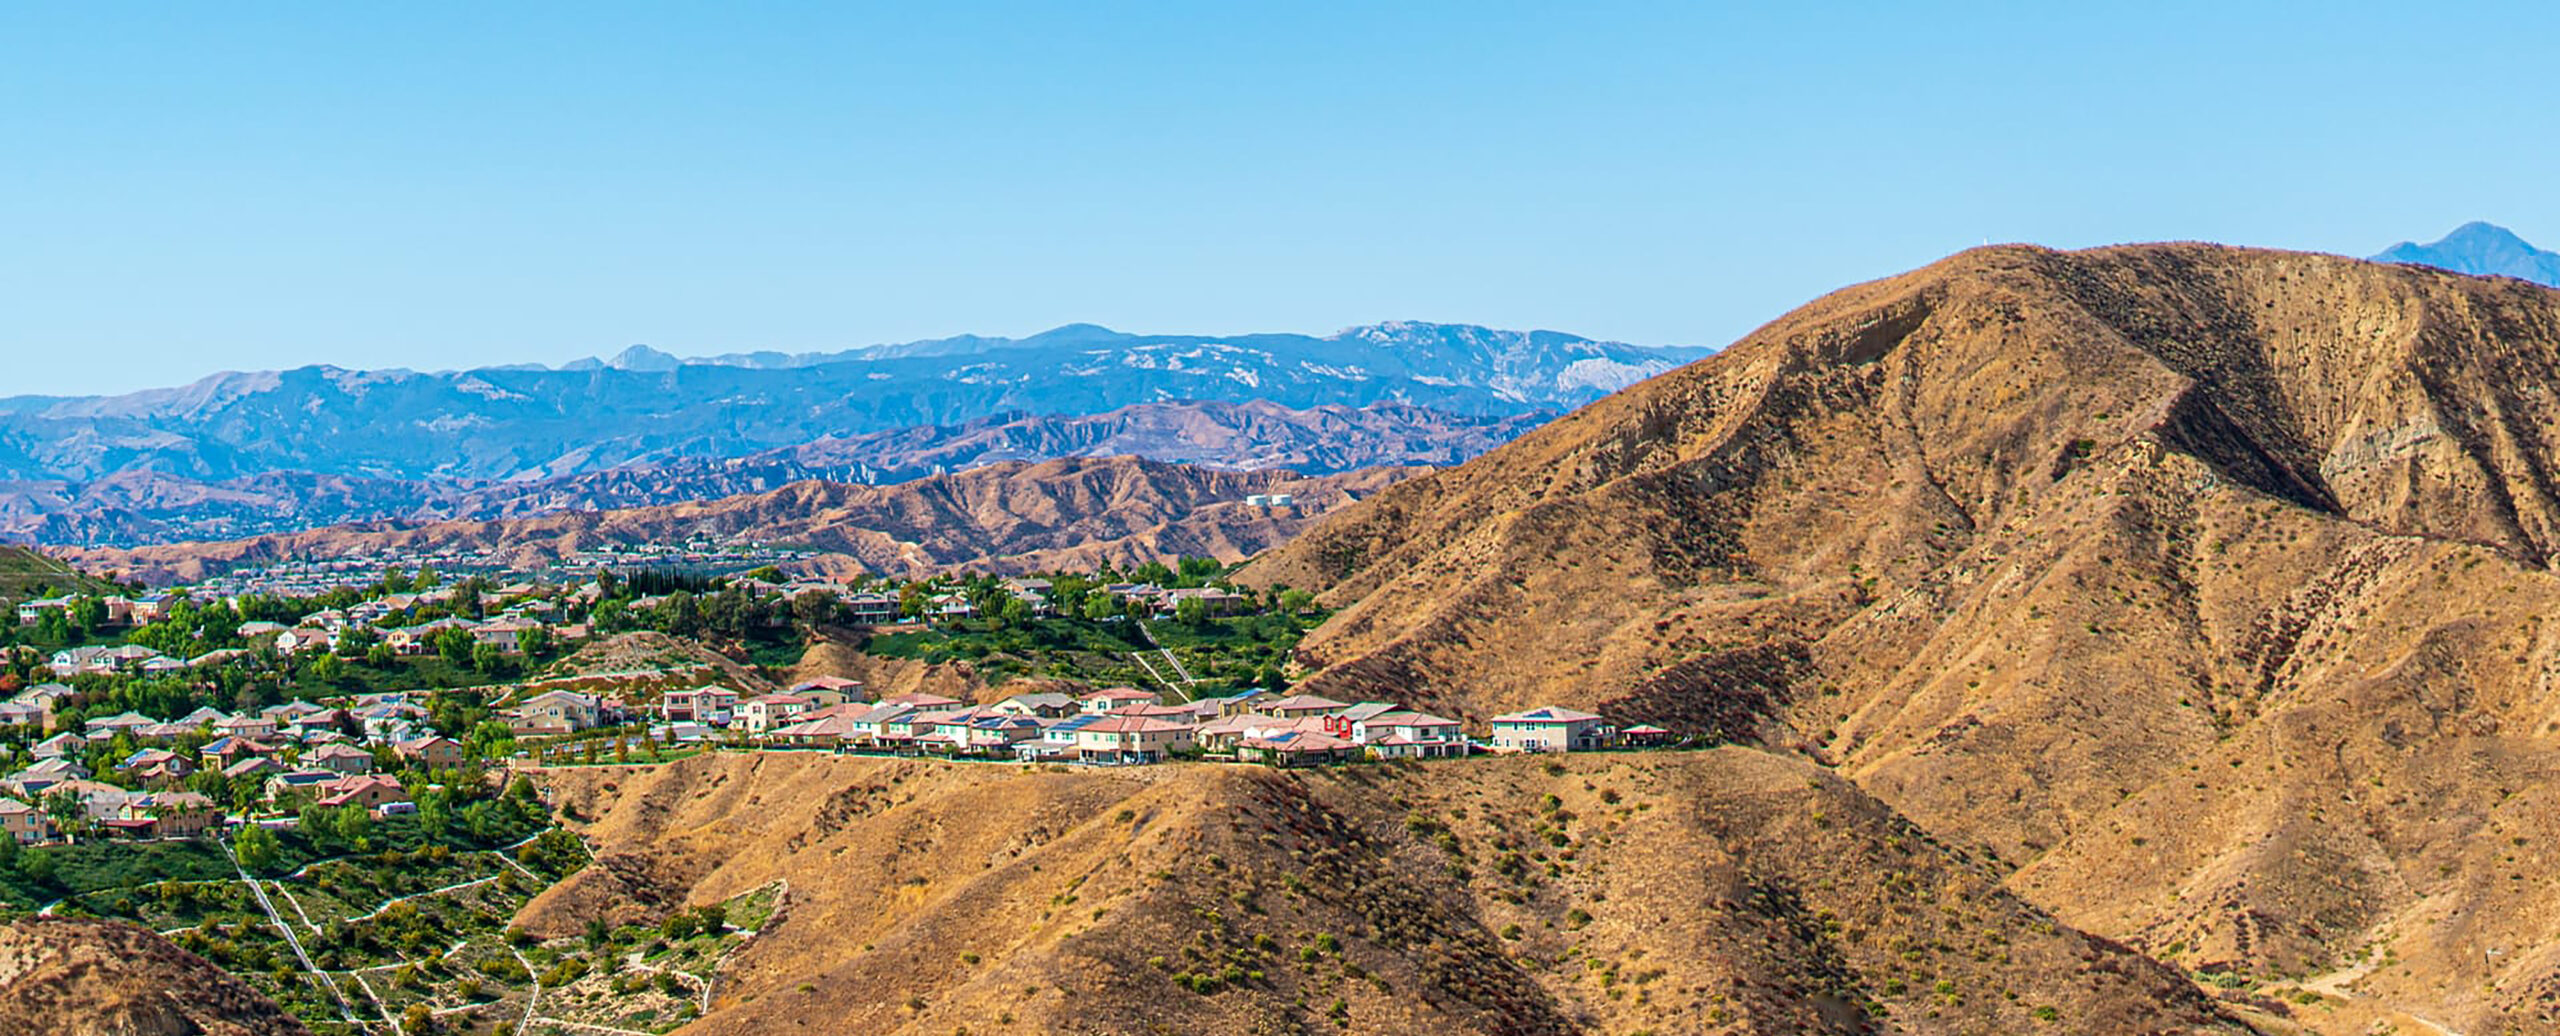 Santa Clarita, California, is a truly exceptional place to live,